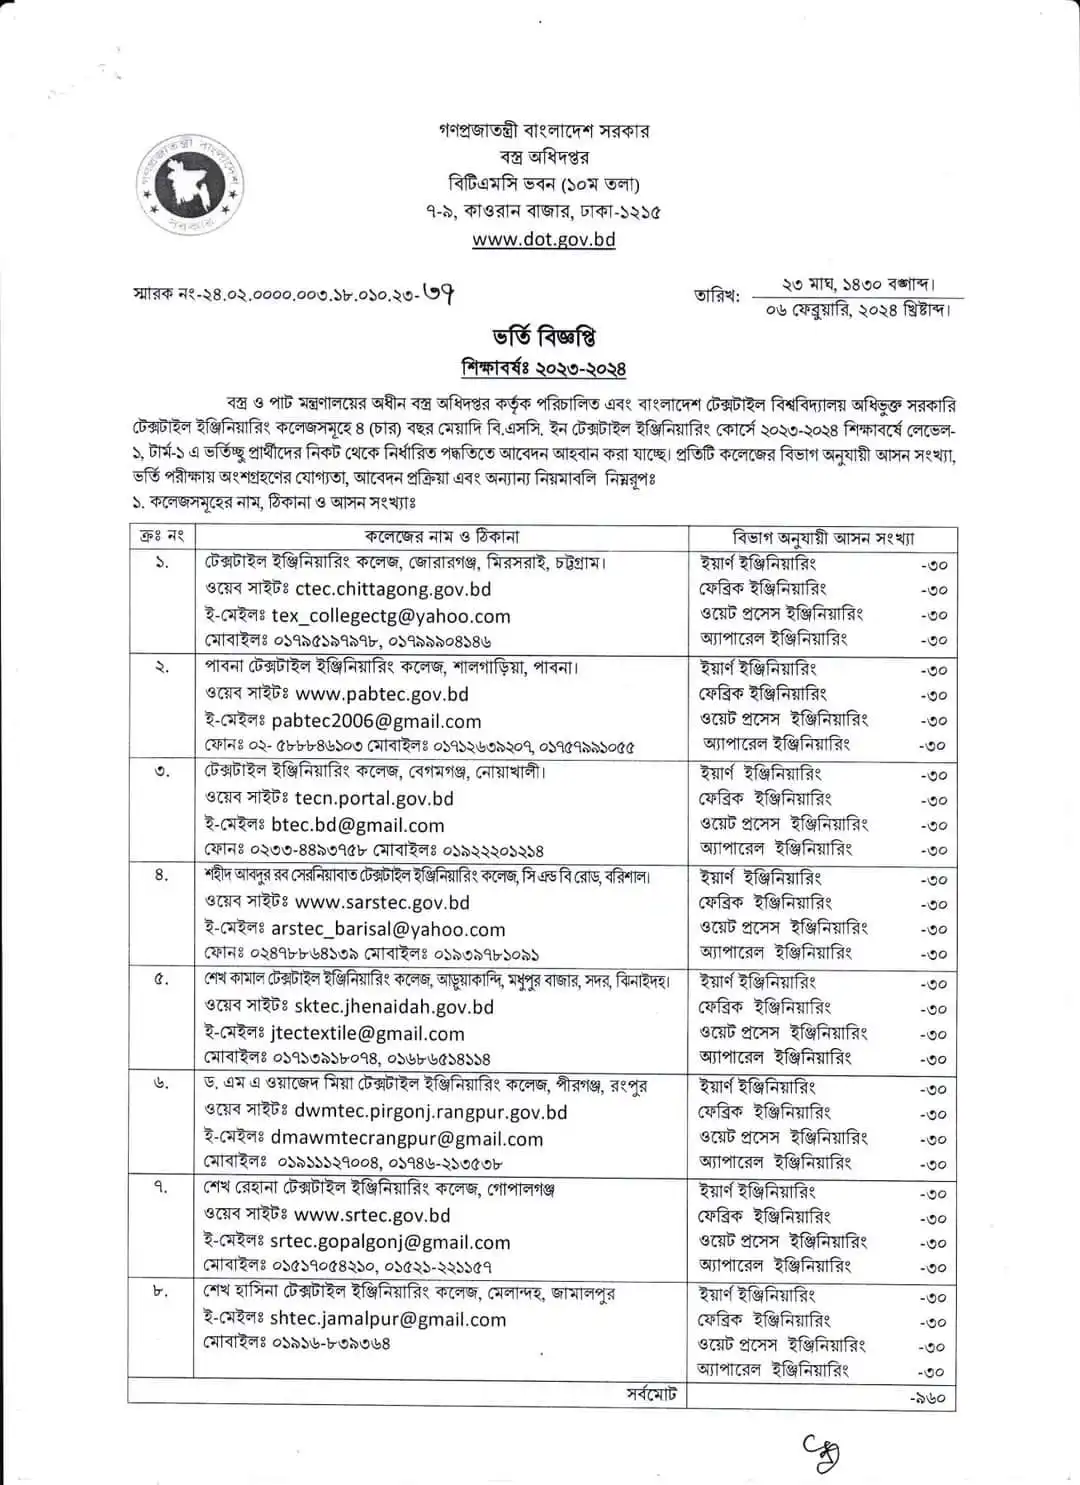 Admission Test Center Code Center Code and Center Name